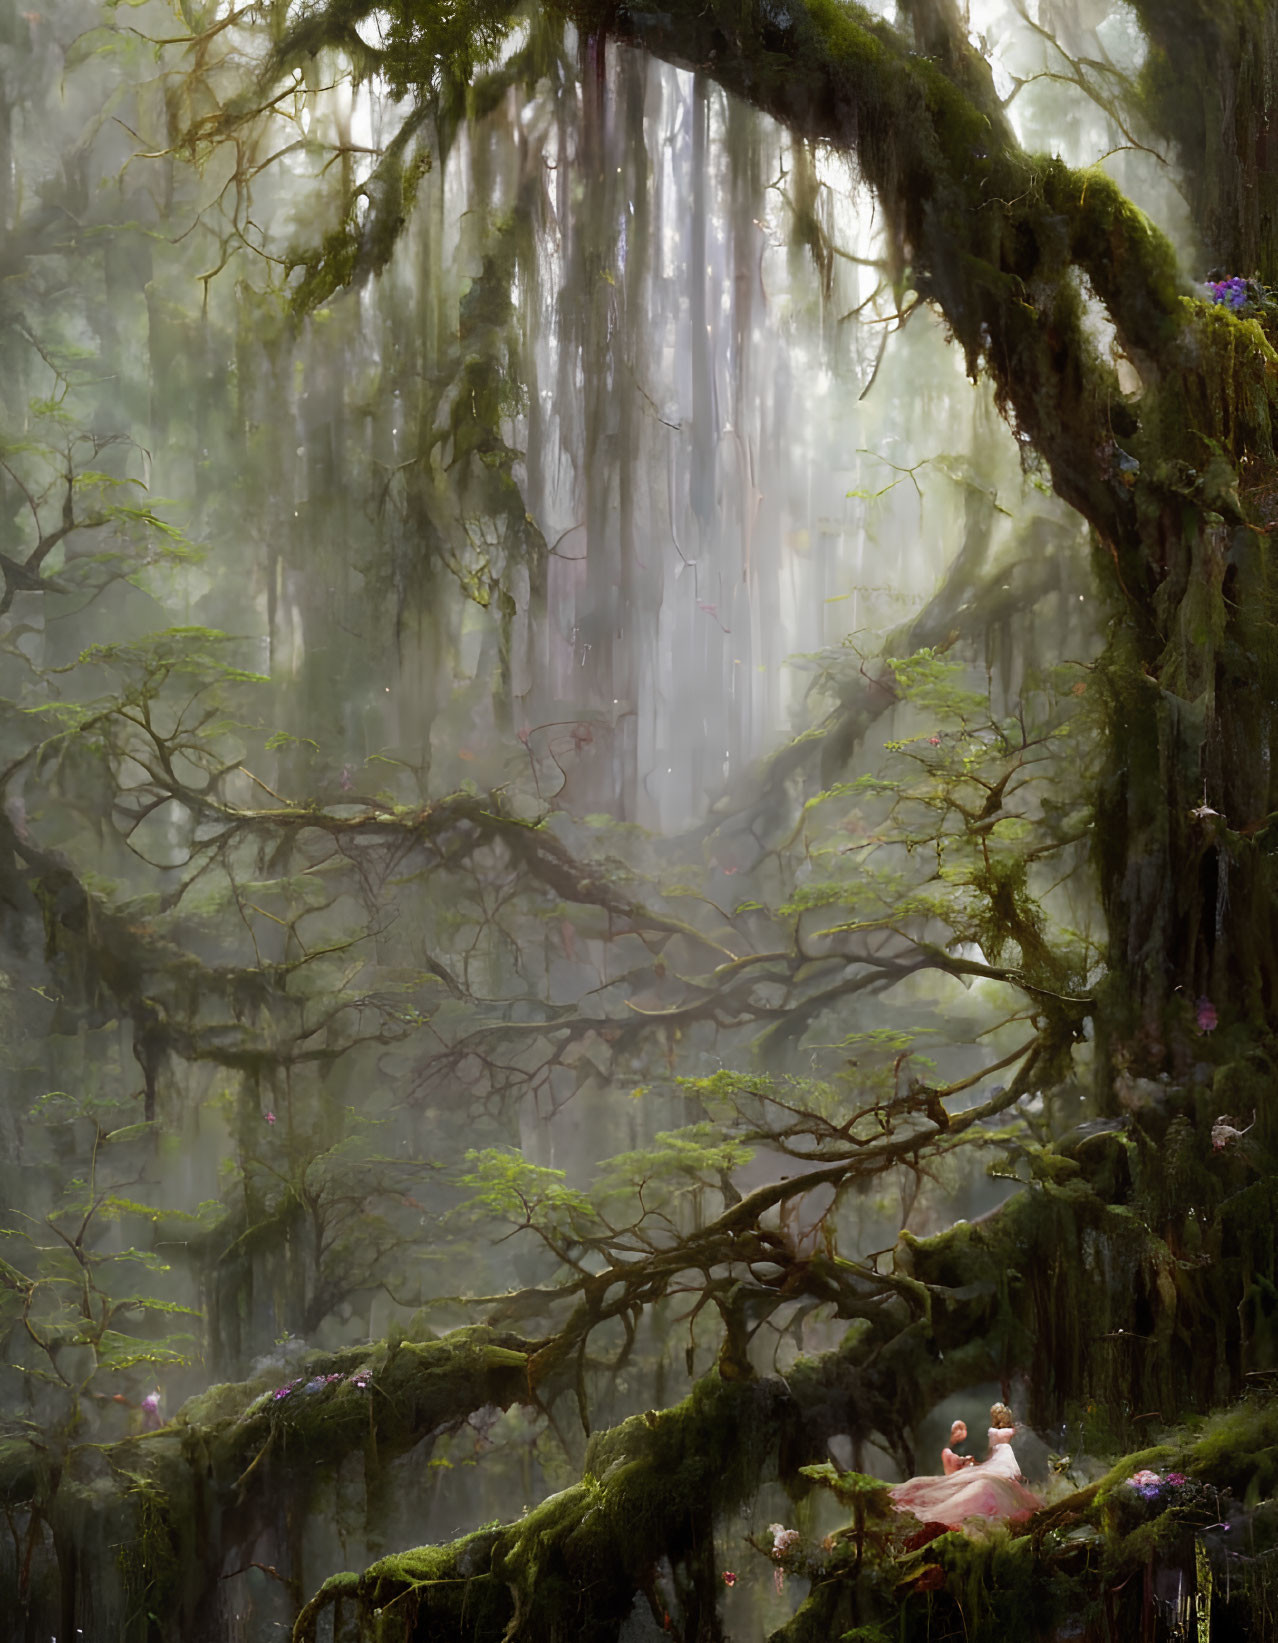 Mystical forest scene with sunbeams, moss-covered trees, and a white bird.